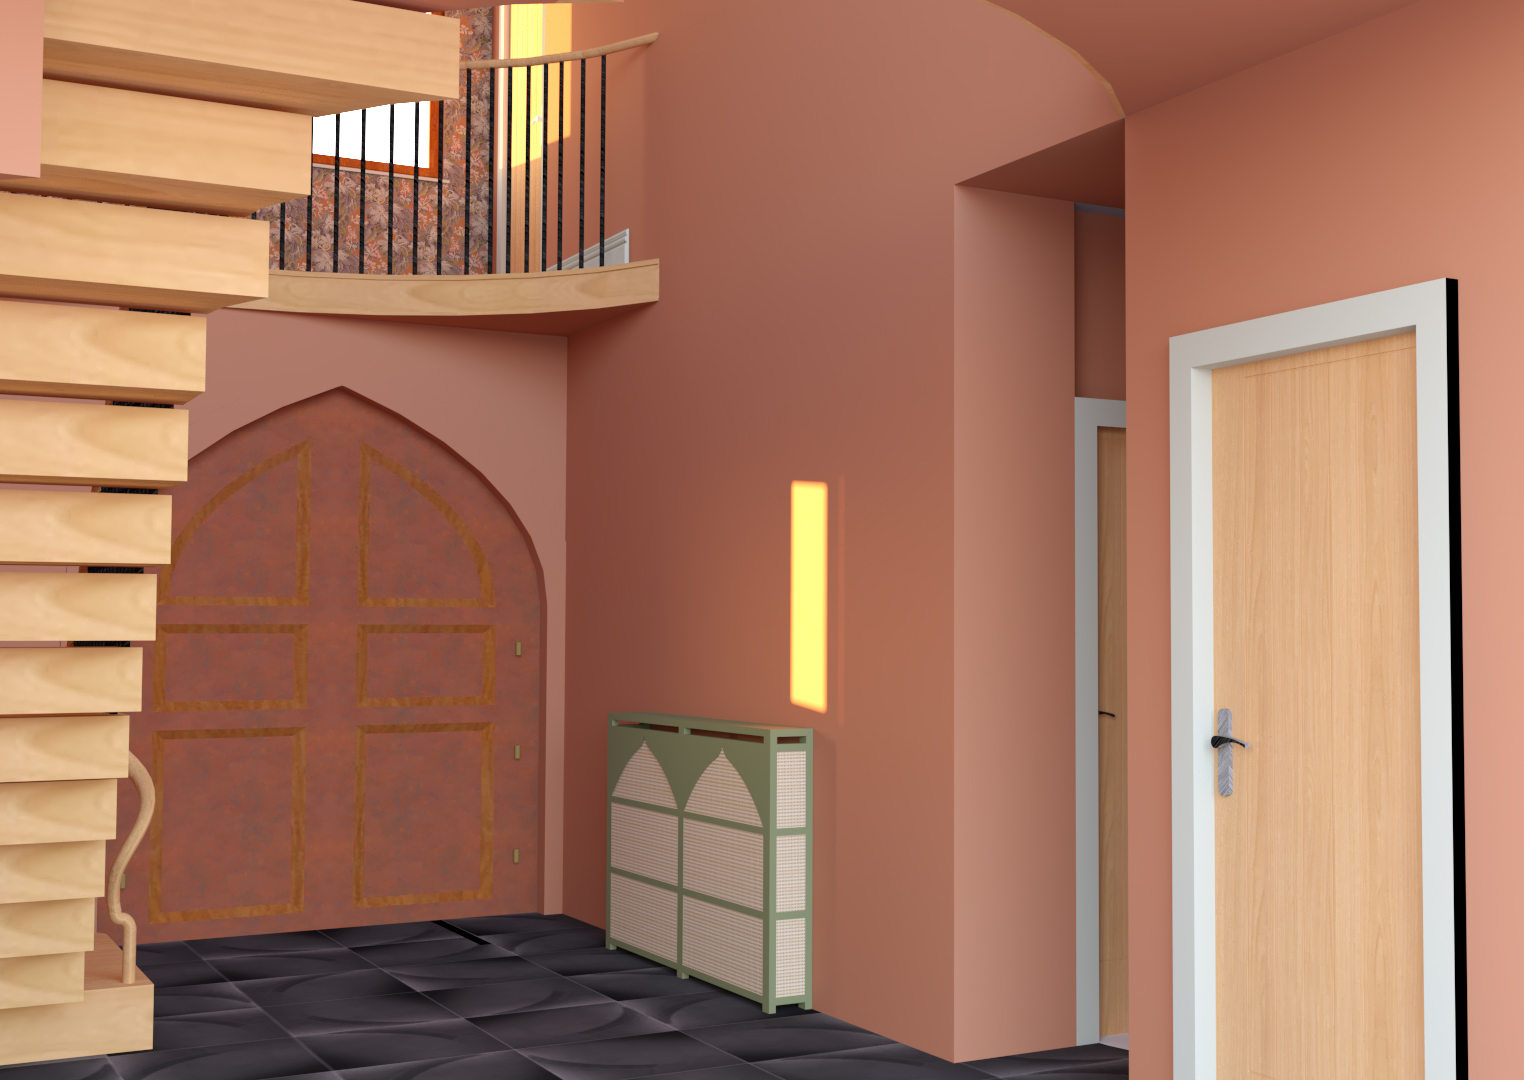 A computer generated image of the hallway with the radiator cover the clients chose.